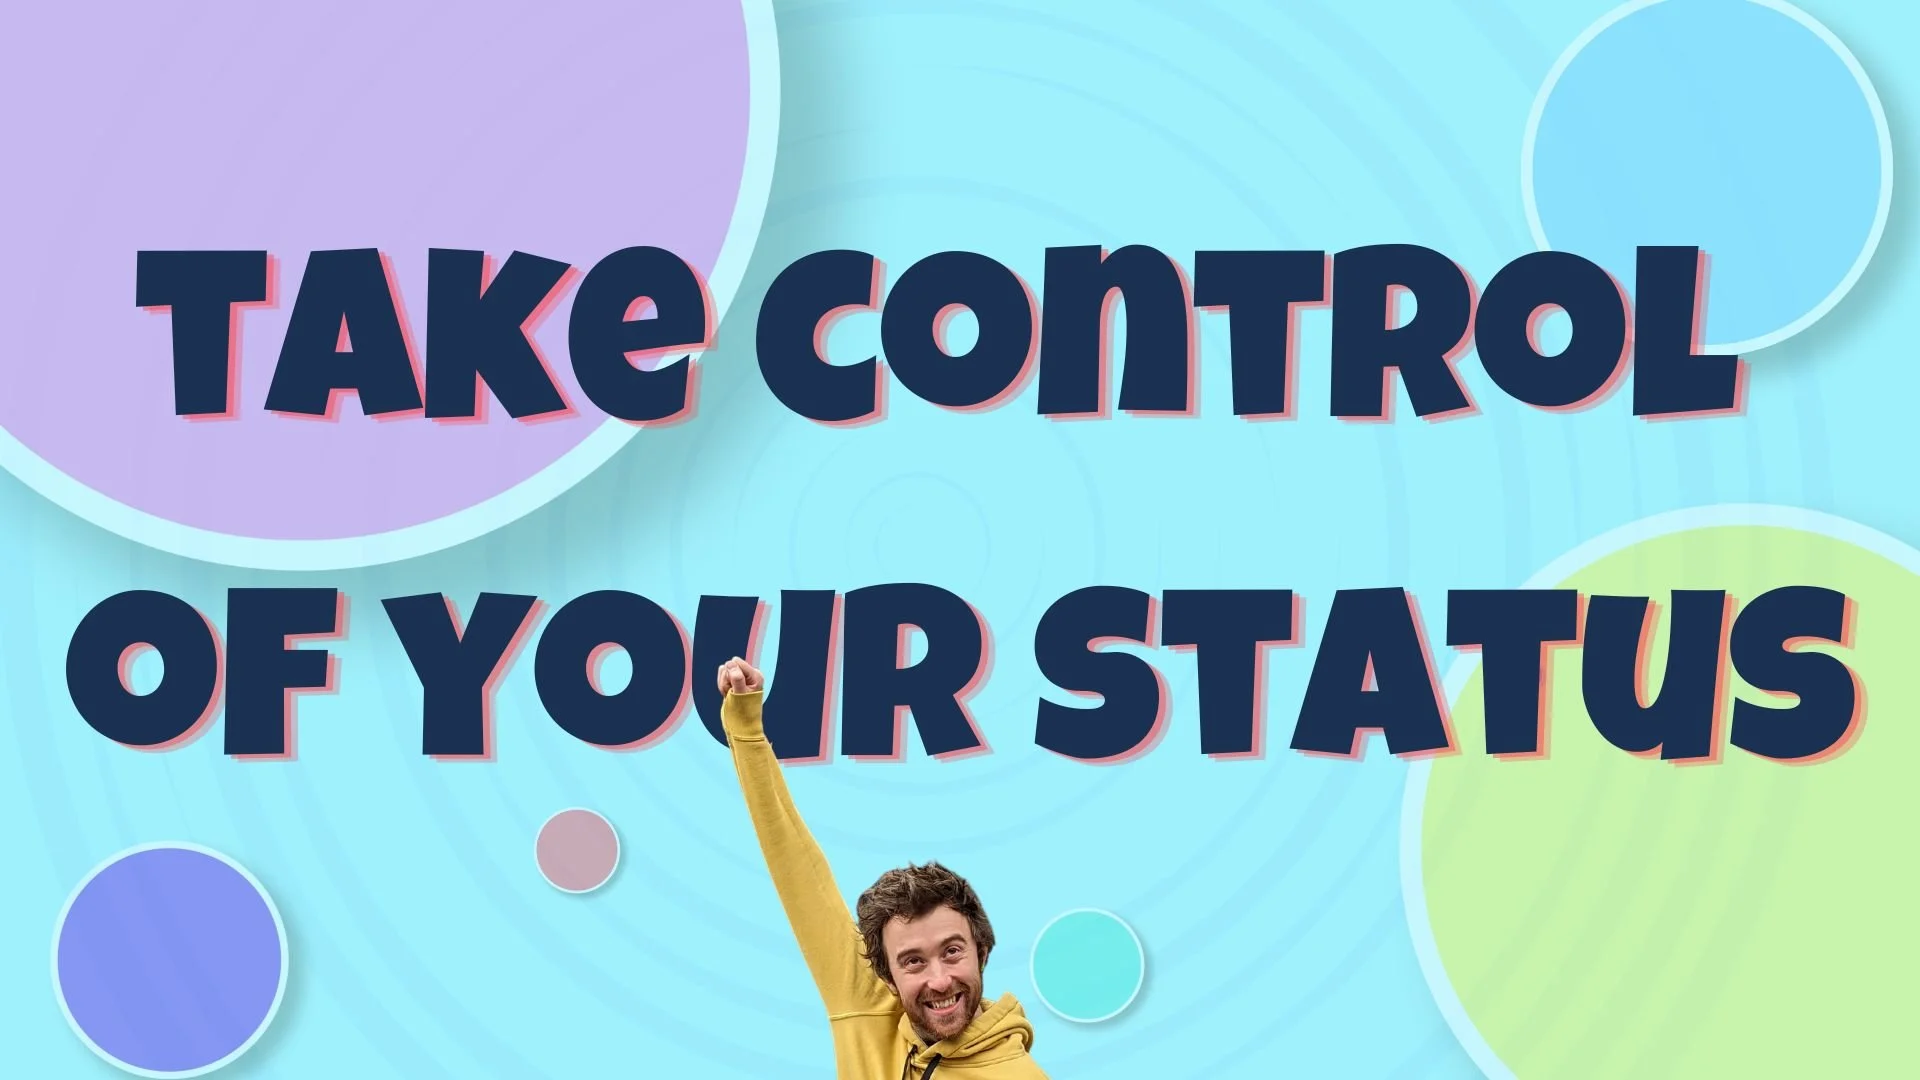 Take control of your status - text written on colourful background alongside image of Charlie Jackson (man) with his arm up in the air celebrating